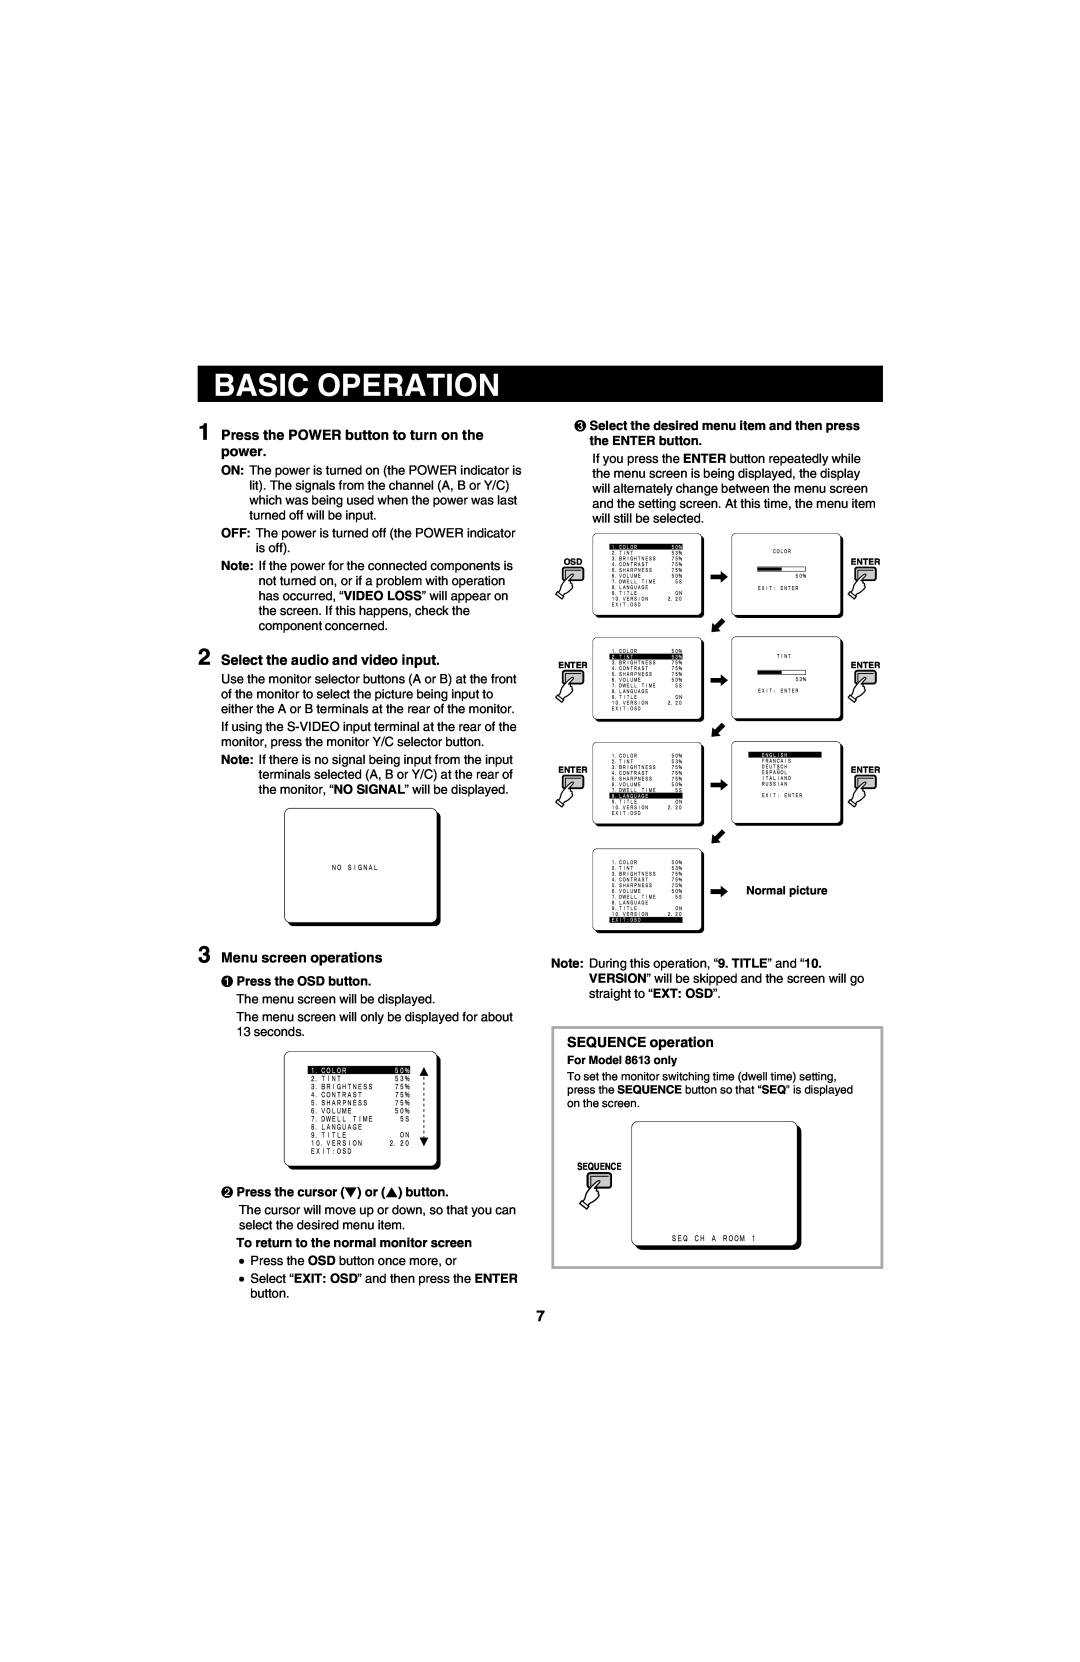 Sanyo VMC-8613, VMC-8618 Basic Operation, Press the POWER button to turn on the power, Select the audio and video input 